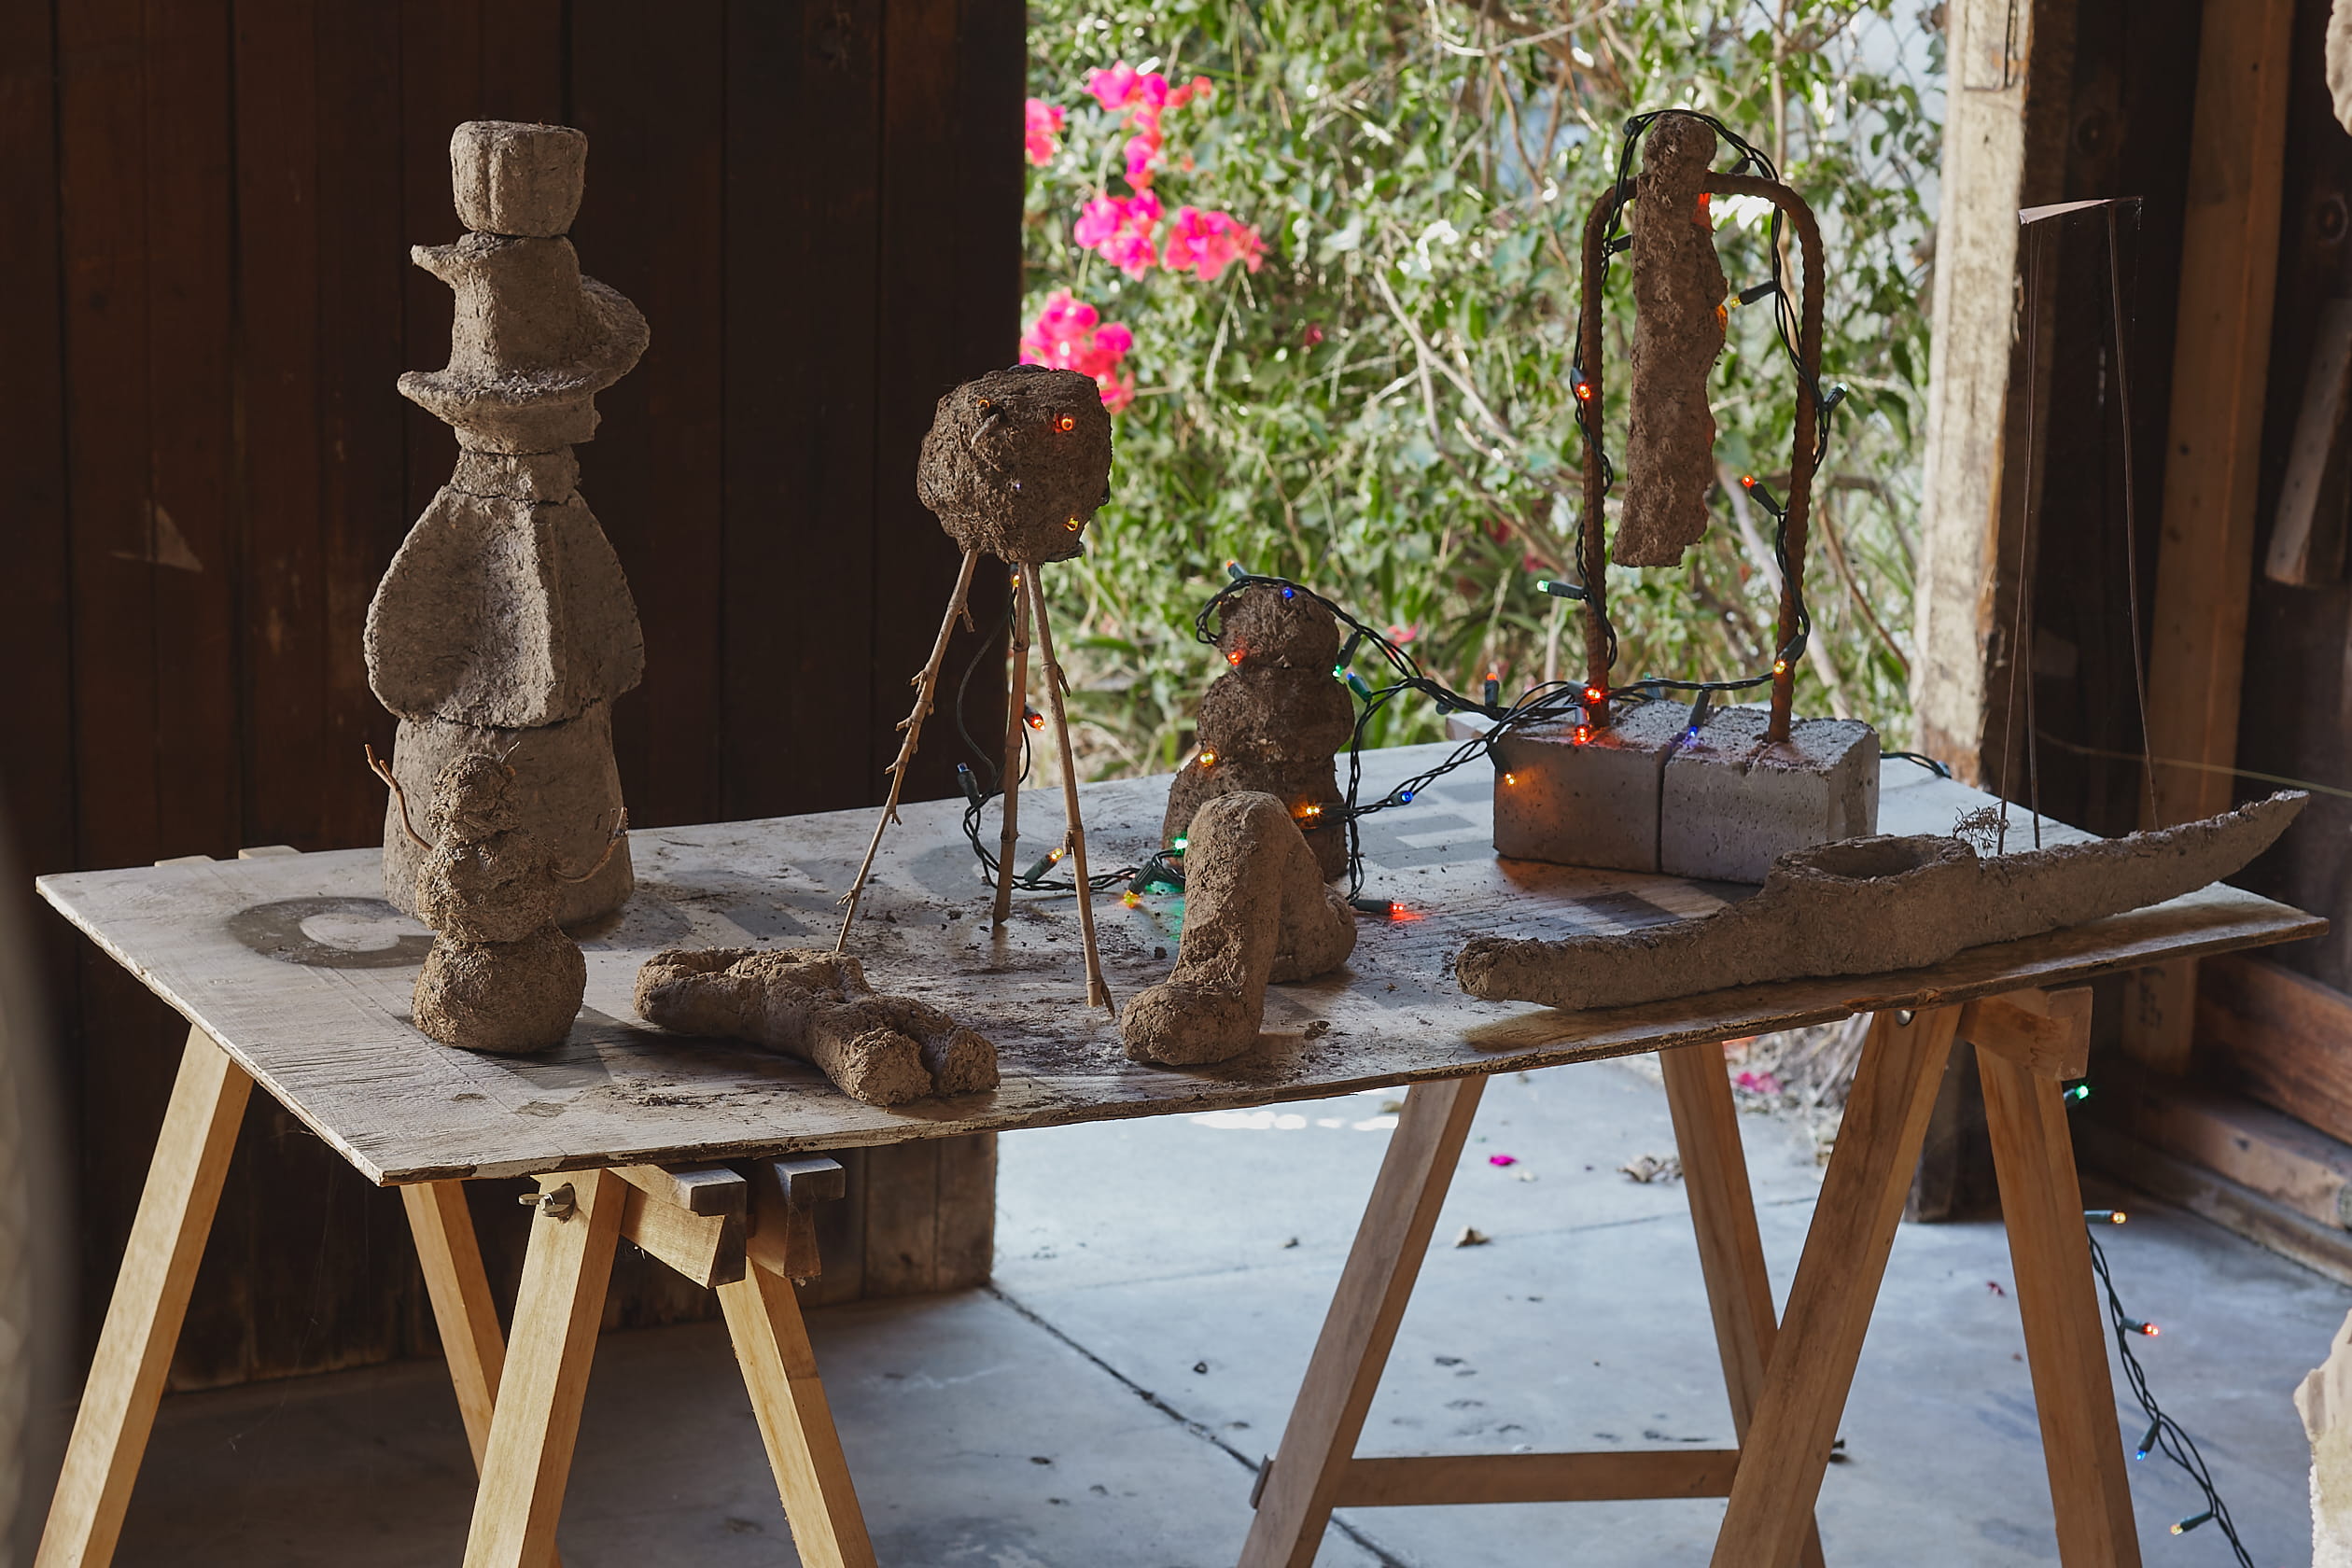 Untitled - A Sculpture By Brian Dario, featuring eight sculptures formed out of dirt, cinderblocks, rebar, and christmas lights on top of a sawhorse with a plank of wood used like a table, in front of an open door to a backyard with pink flowers.